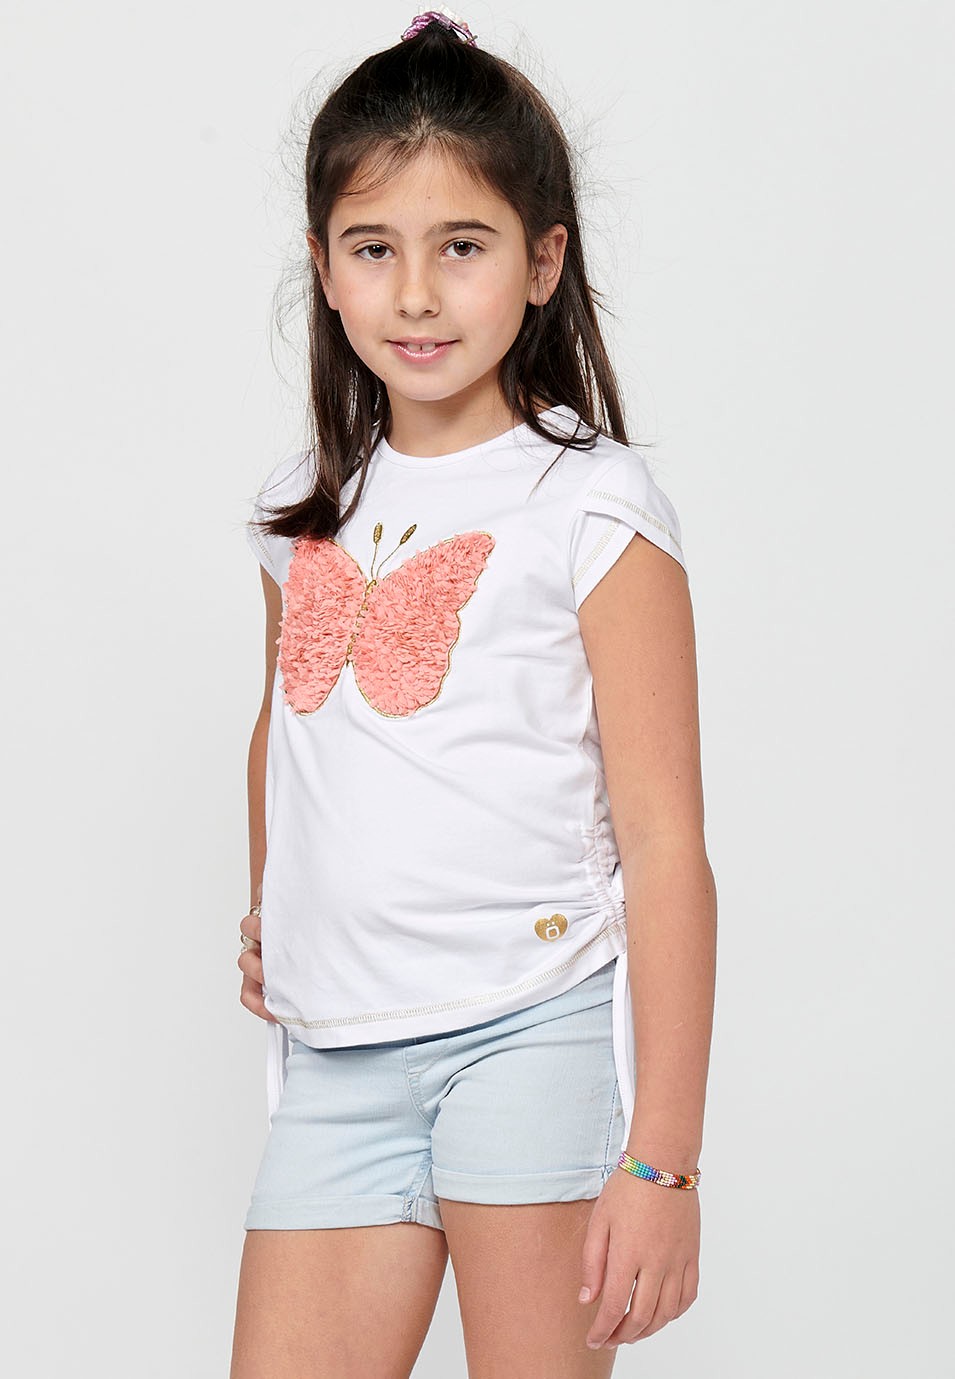 Short-sleeved T-shirt Round Neck Top with Front Print and White Side Details for Girls 9